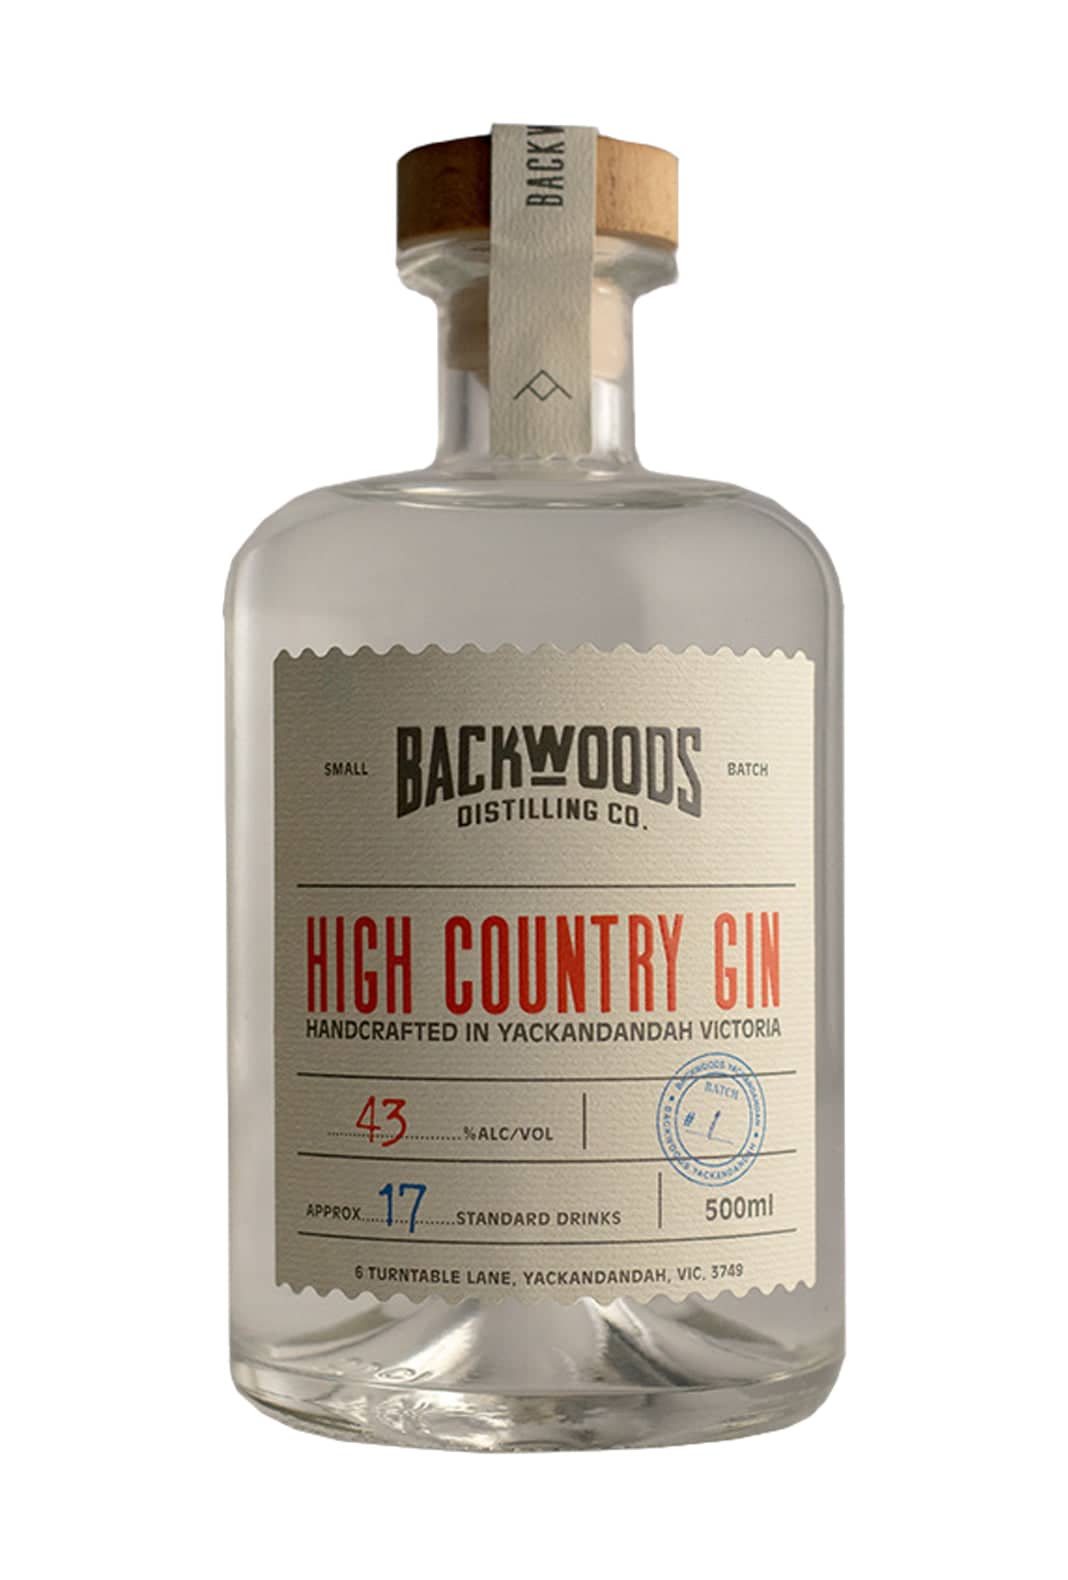 Backwoods High Country Gin 43% 500ml | Gin | Shop online at Spirits of France